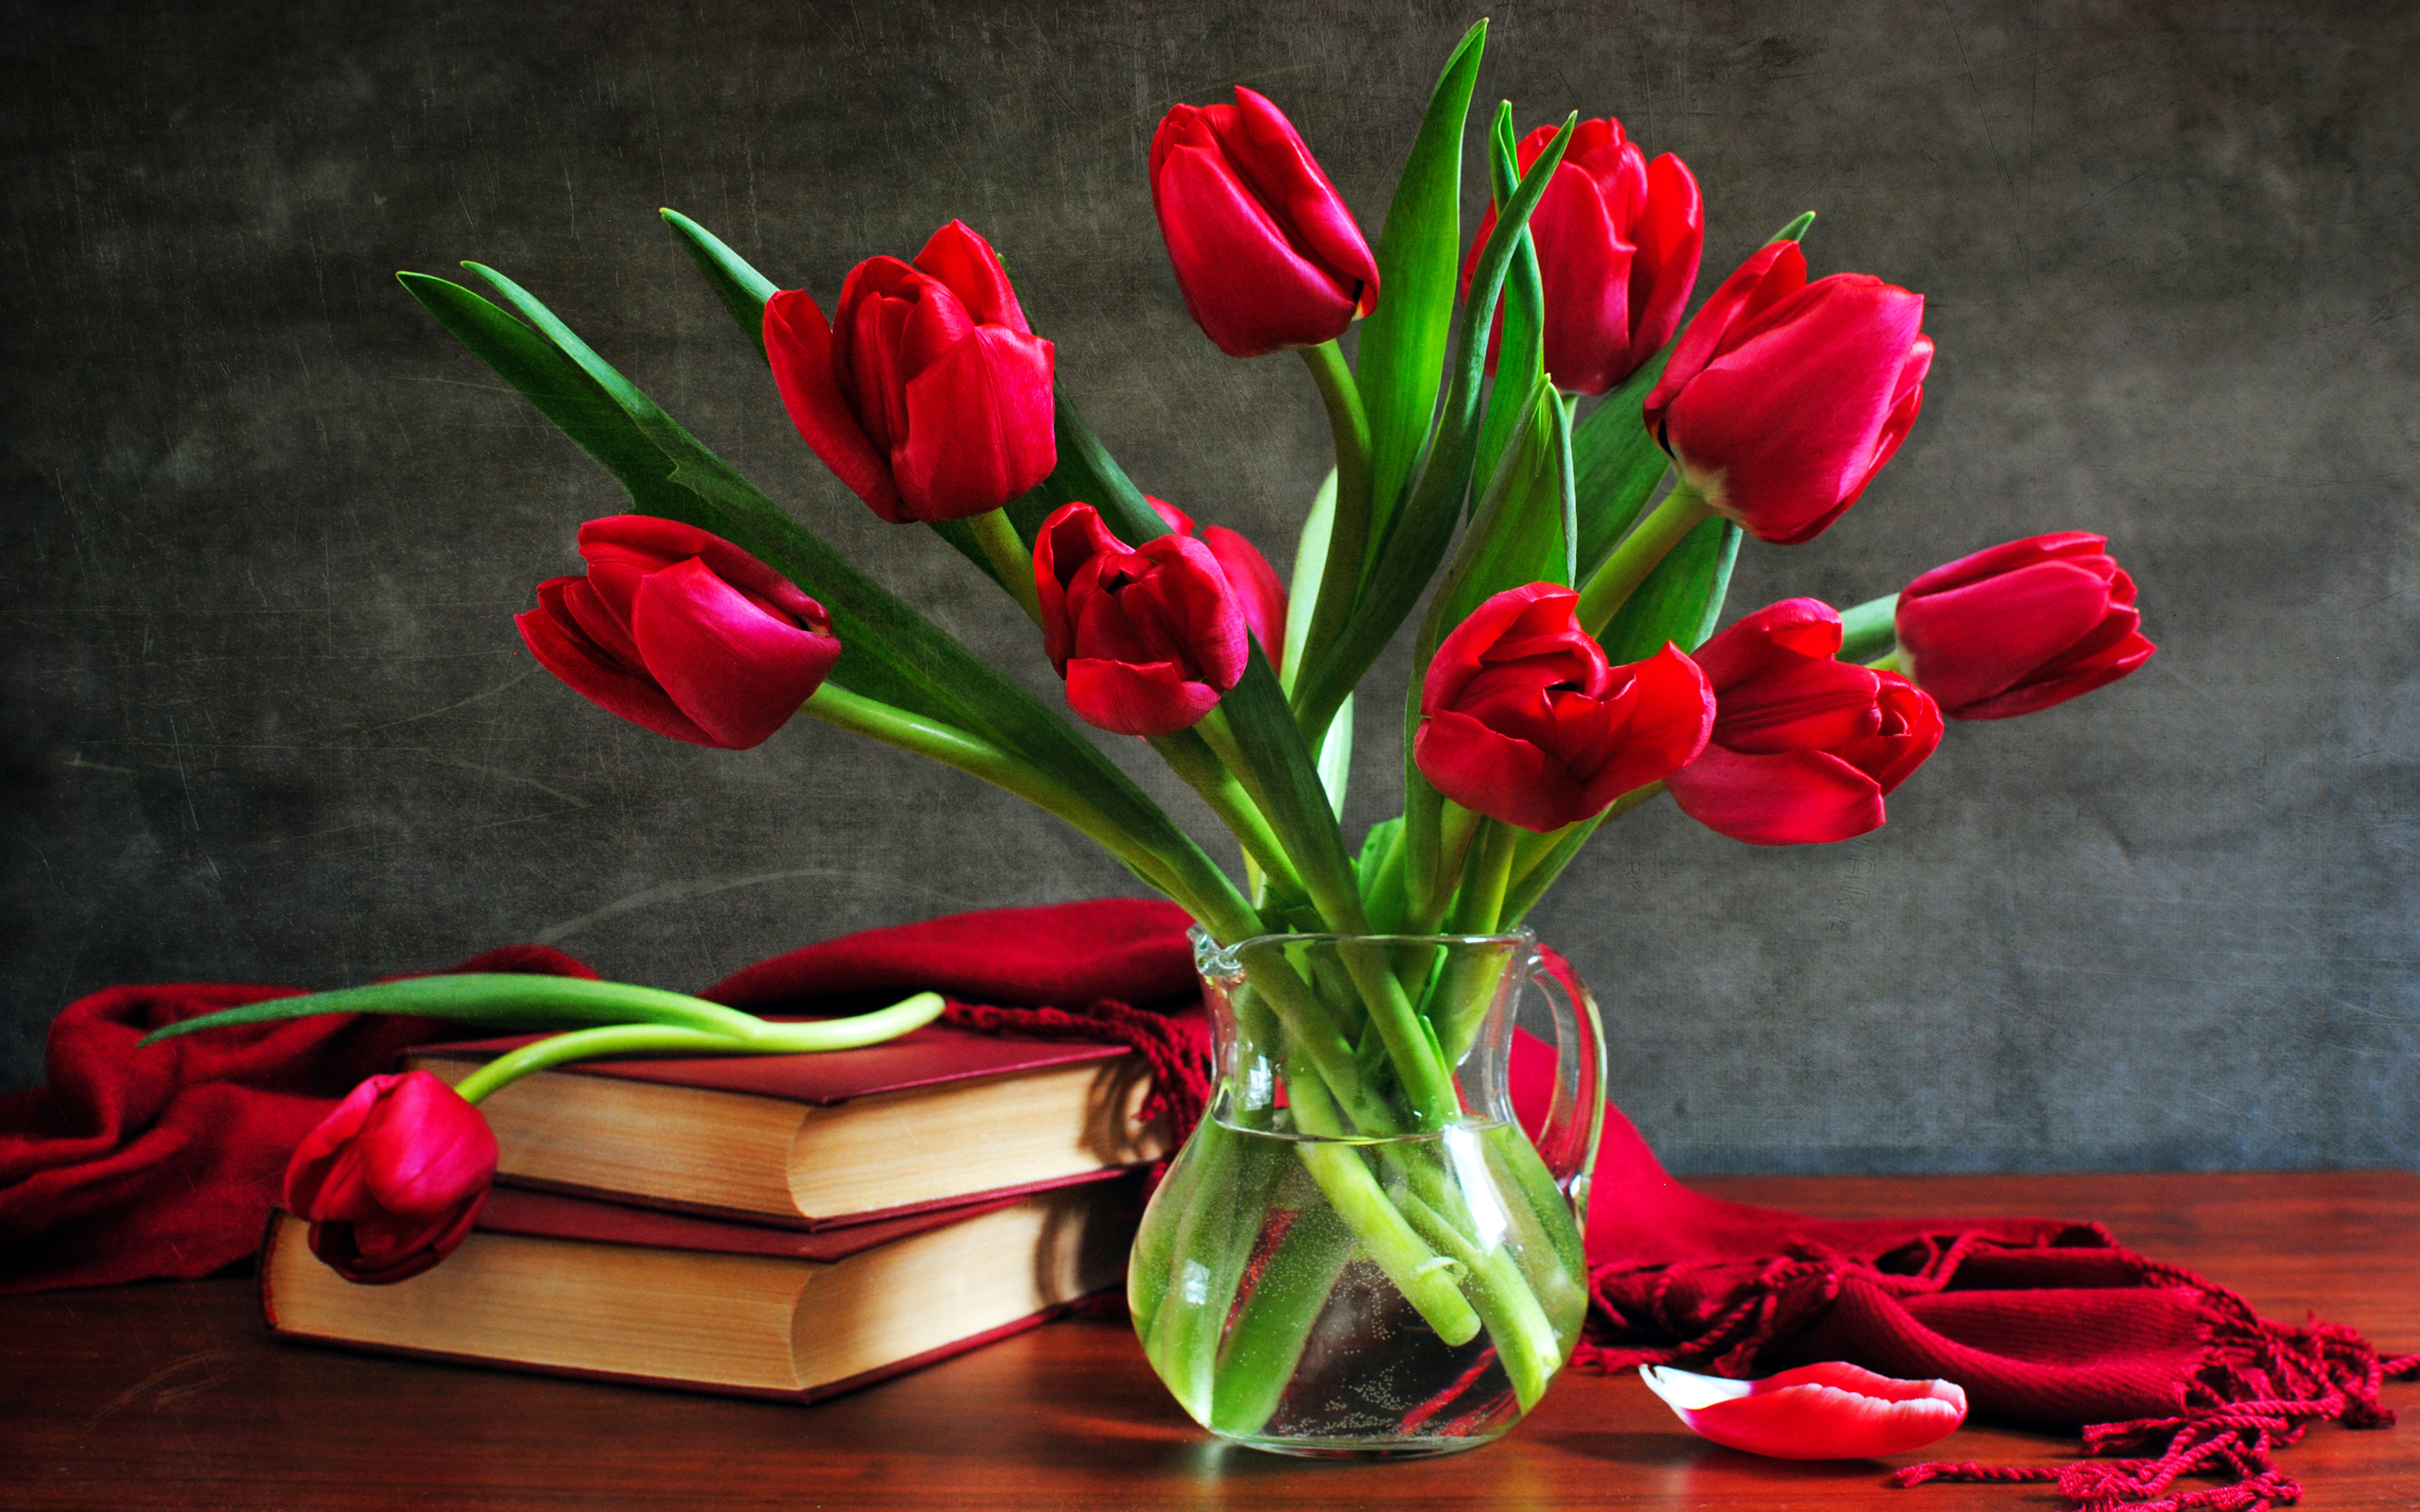 red flower, flower, tulip, still life, photography, book, pitcher, scarf Phone Background